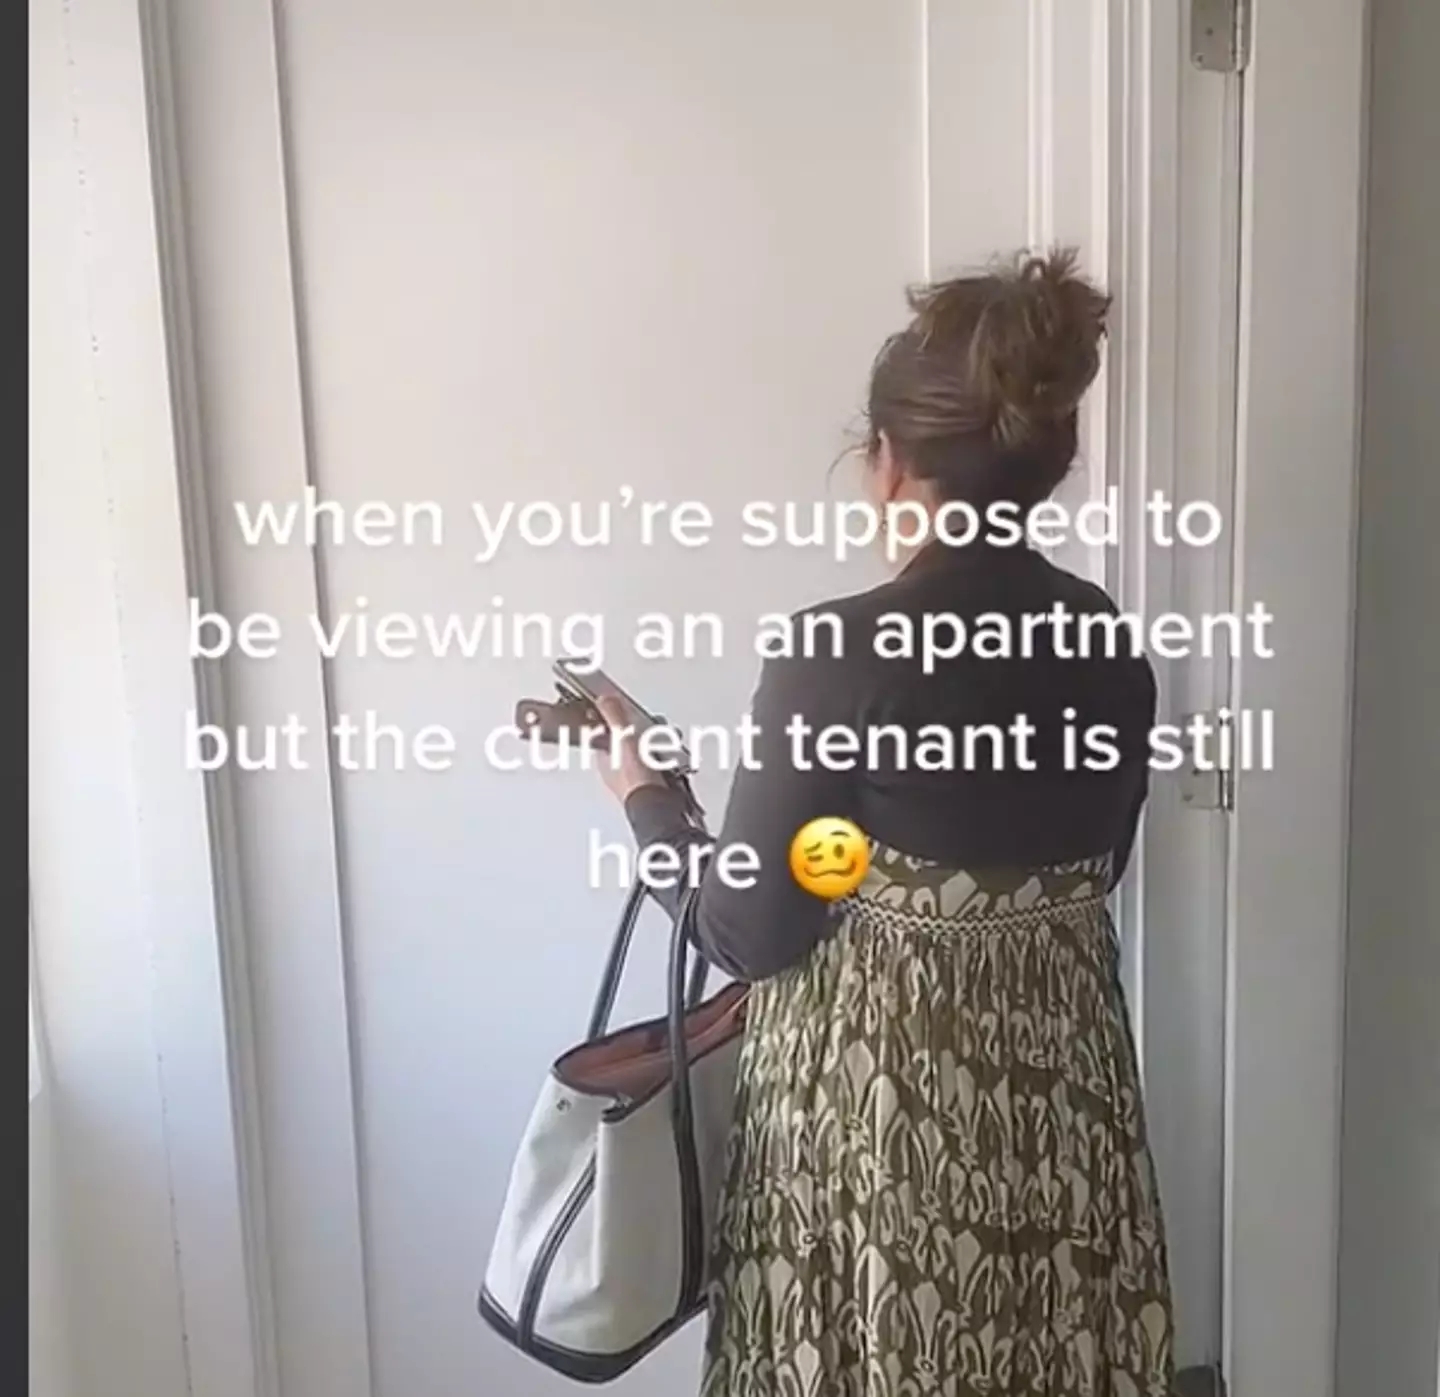 A realtor was left 'very upset' after finding who she at first thought to be the previous tenant asleep on the floor during an apartment viewing.